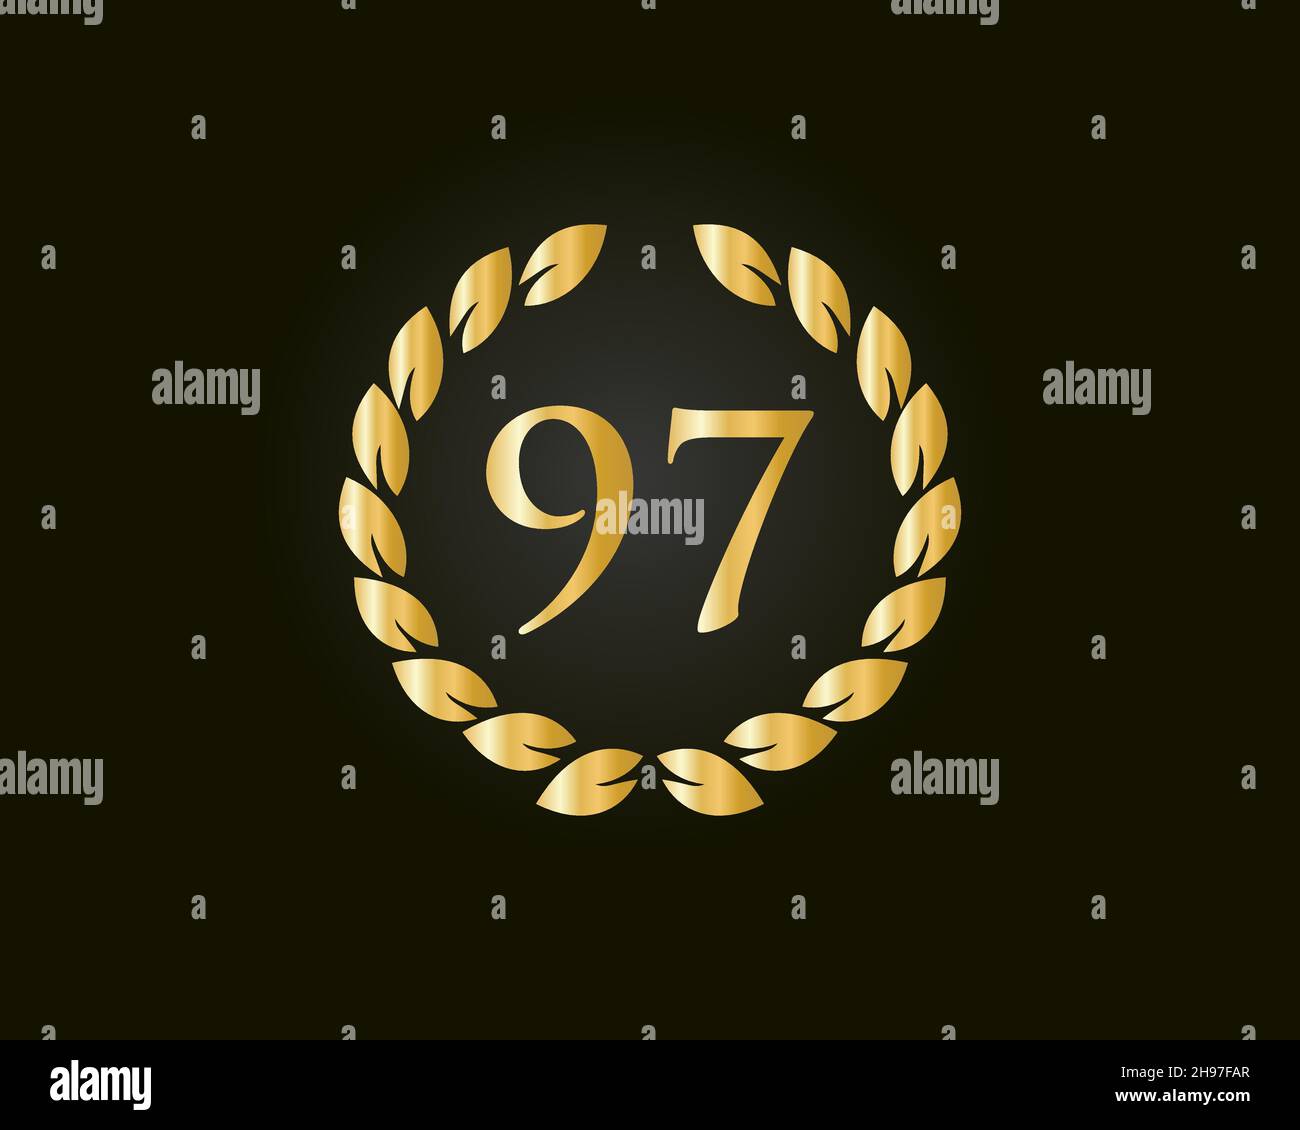 97th Anniversary Ring Logo Template. 97th Years Anniversary Logo With Golden Ring Isolated On Black Background, For Birthday, Anniversary And Company Stock Vector